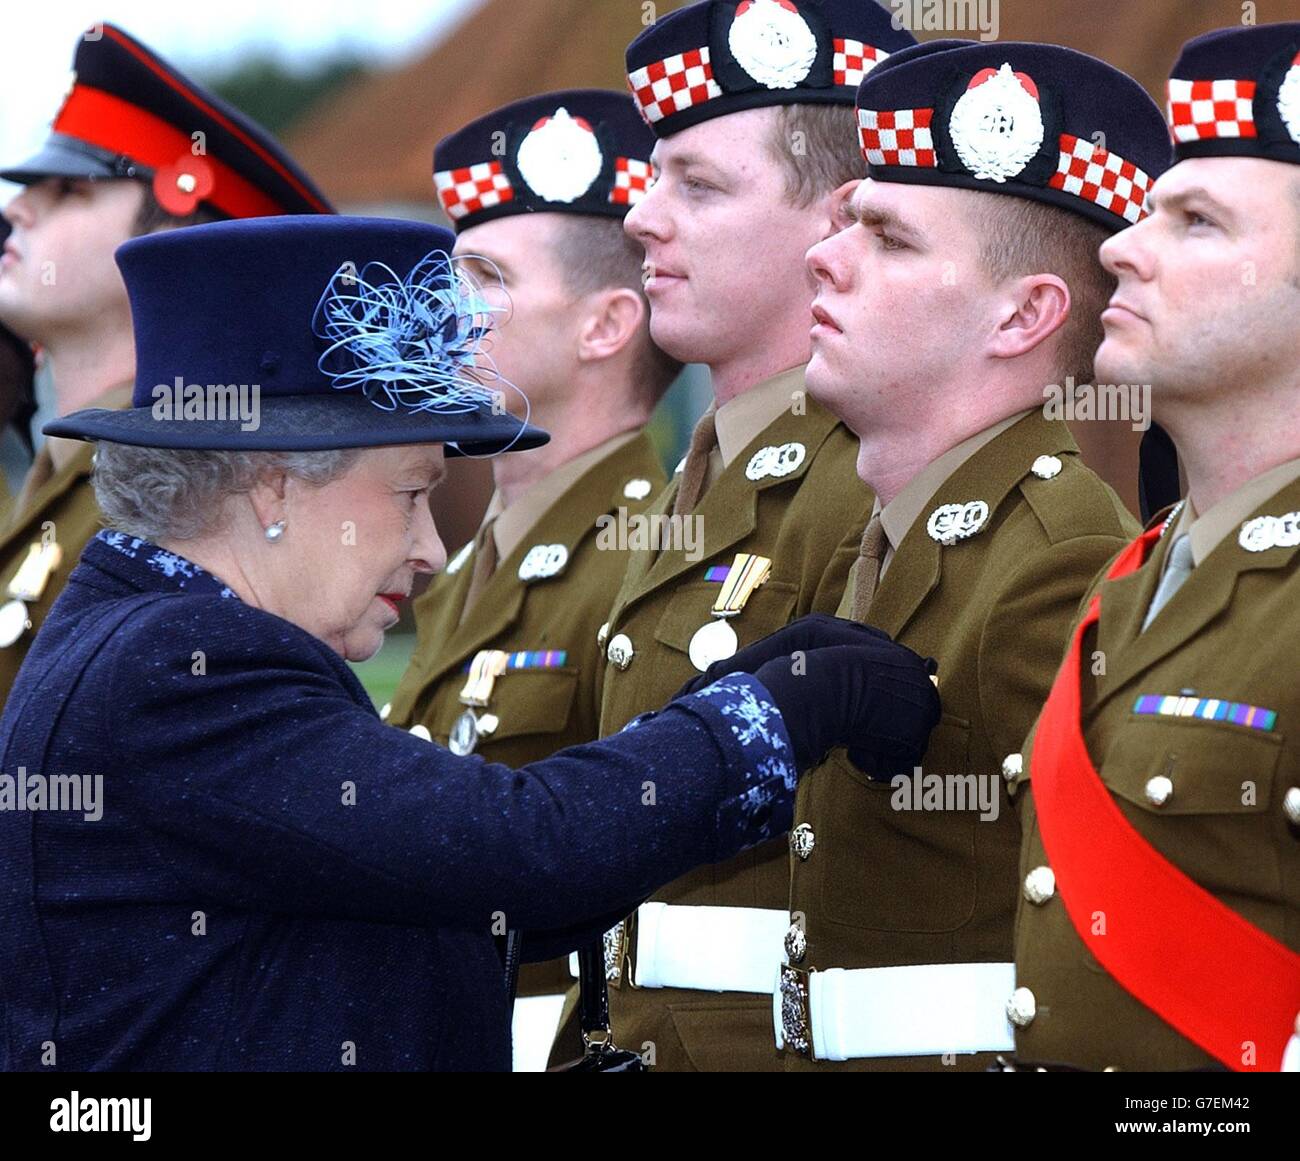 Britain's Queen Elizabeth II presents an Iraq Campaign medal to Private John Smith at Howe Barracks in Canterbury, Kent on a visit as Commander in Chief of the 1st Battalion of The Argyll and Sutherland Highlanders. Stock Photo